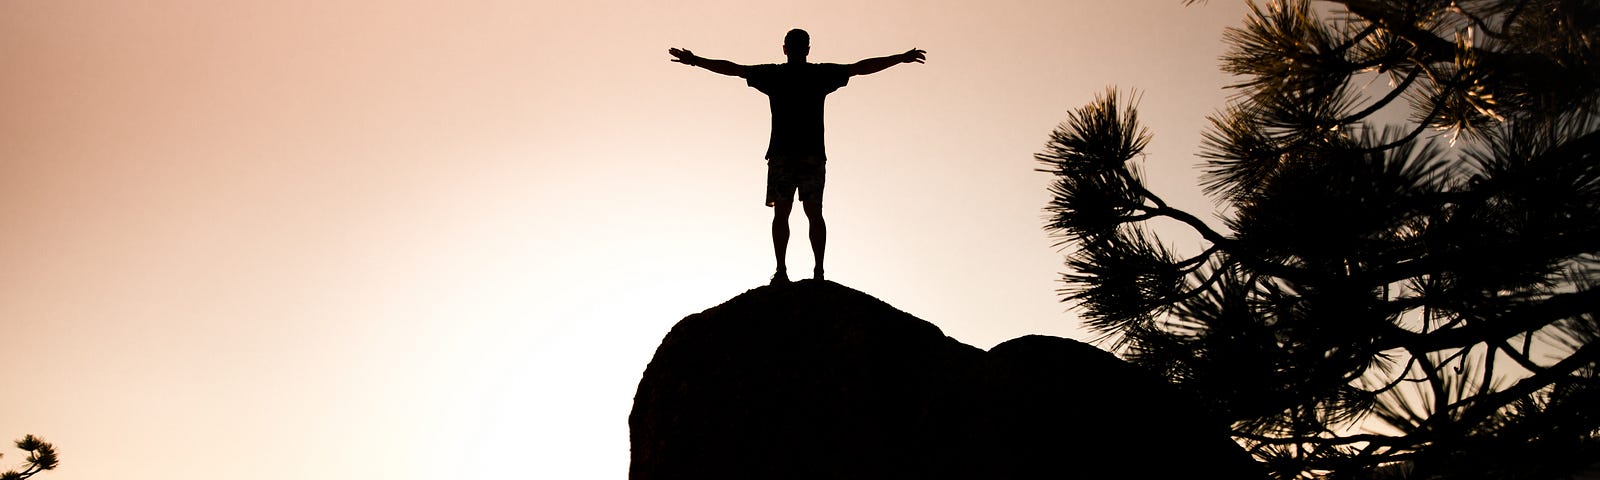 Silohuette of a person on a cliff with arms outstretched in freedom and joy